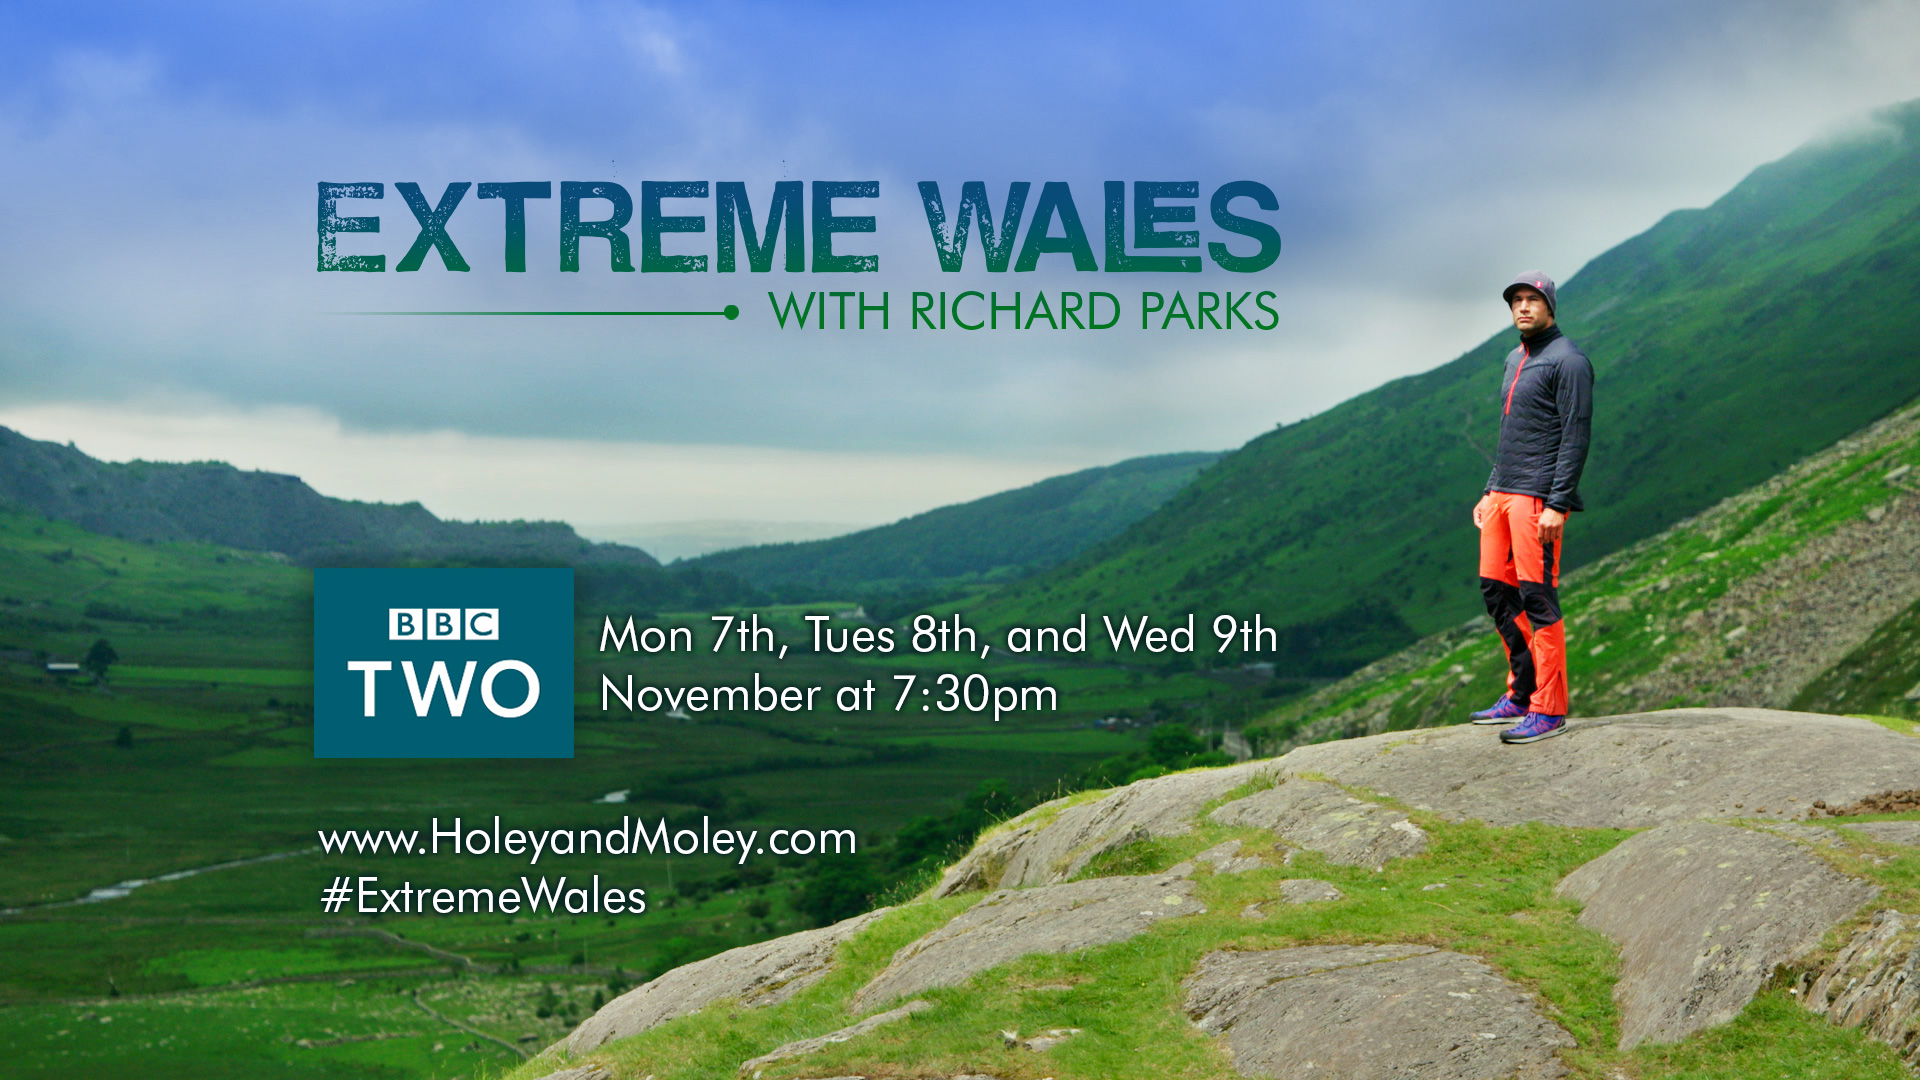 Extreme Wales with Richard Parks © Holey and Moley Ltd